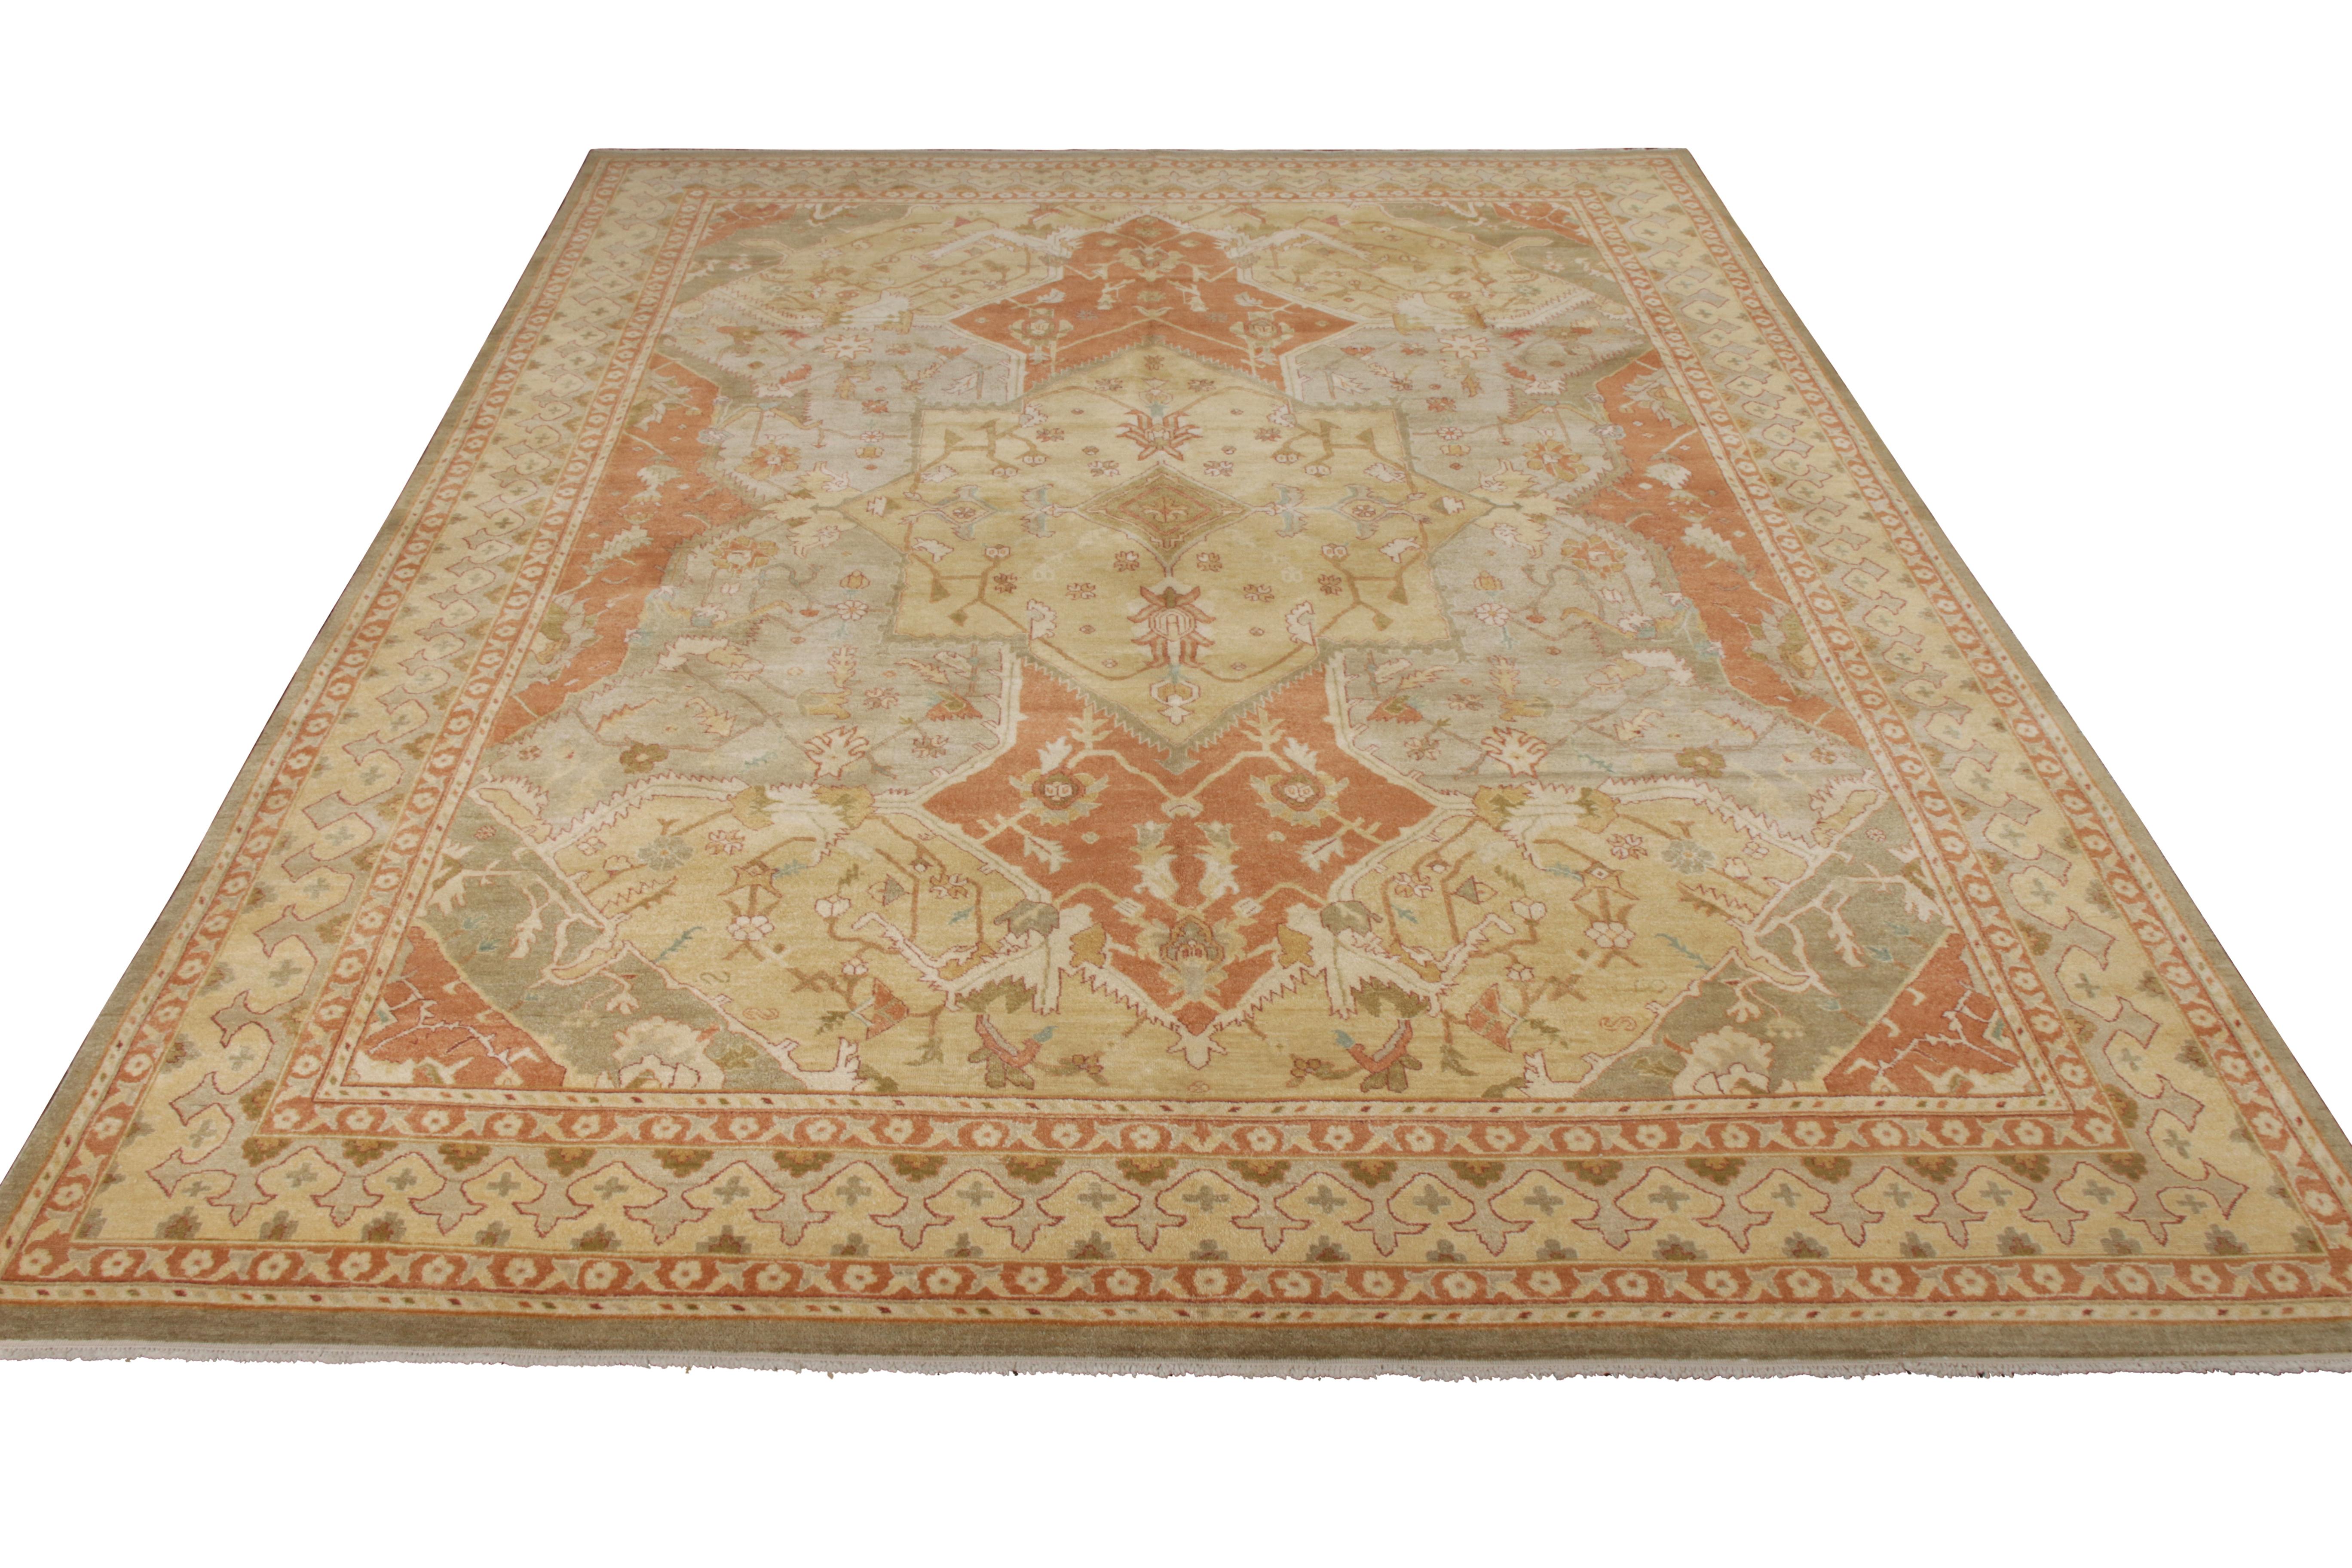 An ode to celebrated medallion pattern Polonaise rug styles in beige-brown, joining Rug & Kilim’s Modern Classics Collection. Hand-knotted in wool, this 9 x 11 recaptures a distinguished, regal classic with exceptional scale and refined